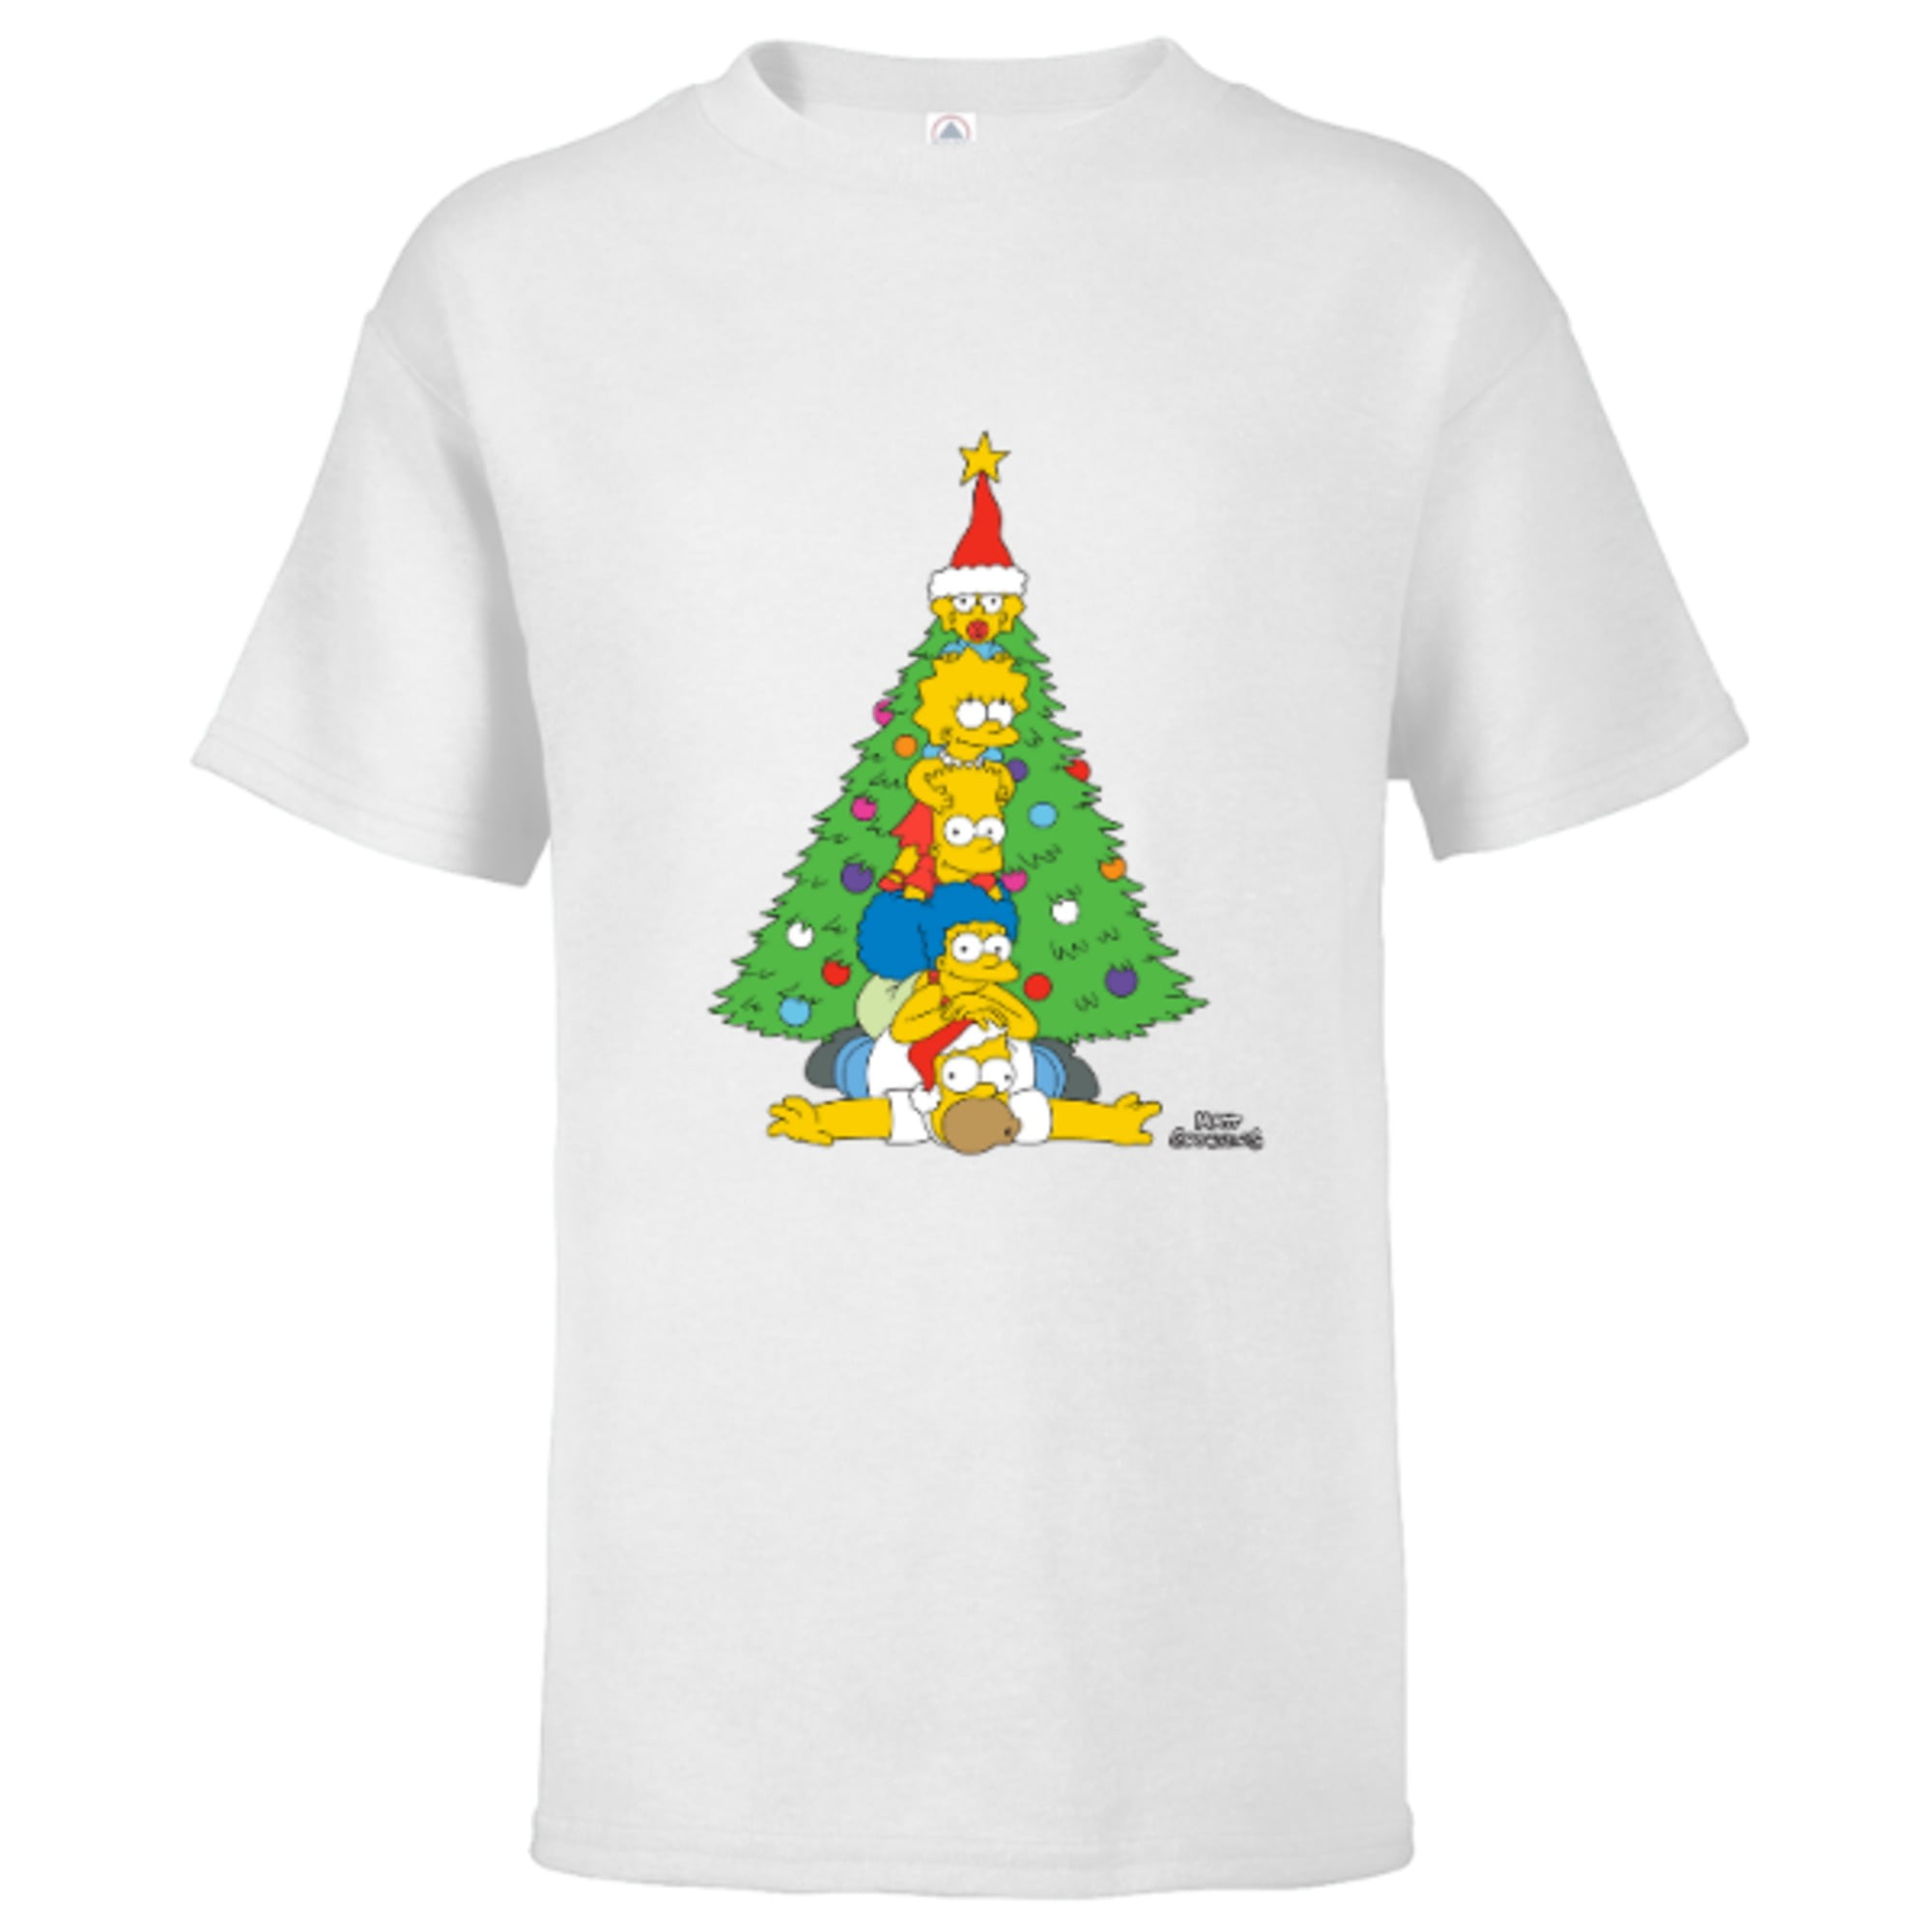 Christmas Customized-Soft The T-Shirt Sleeve Family Holiday Simpsons - Short Tree – Kids for Pink